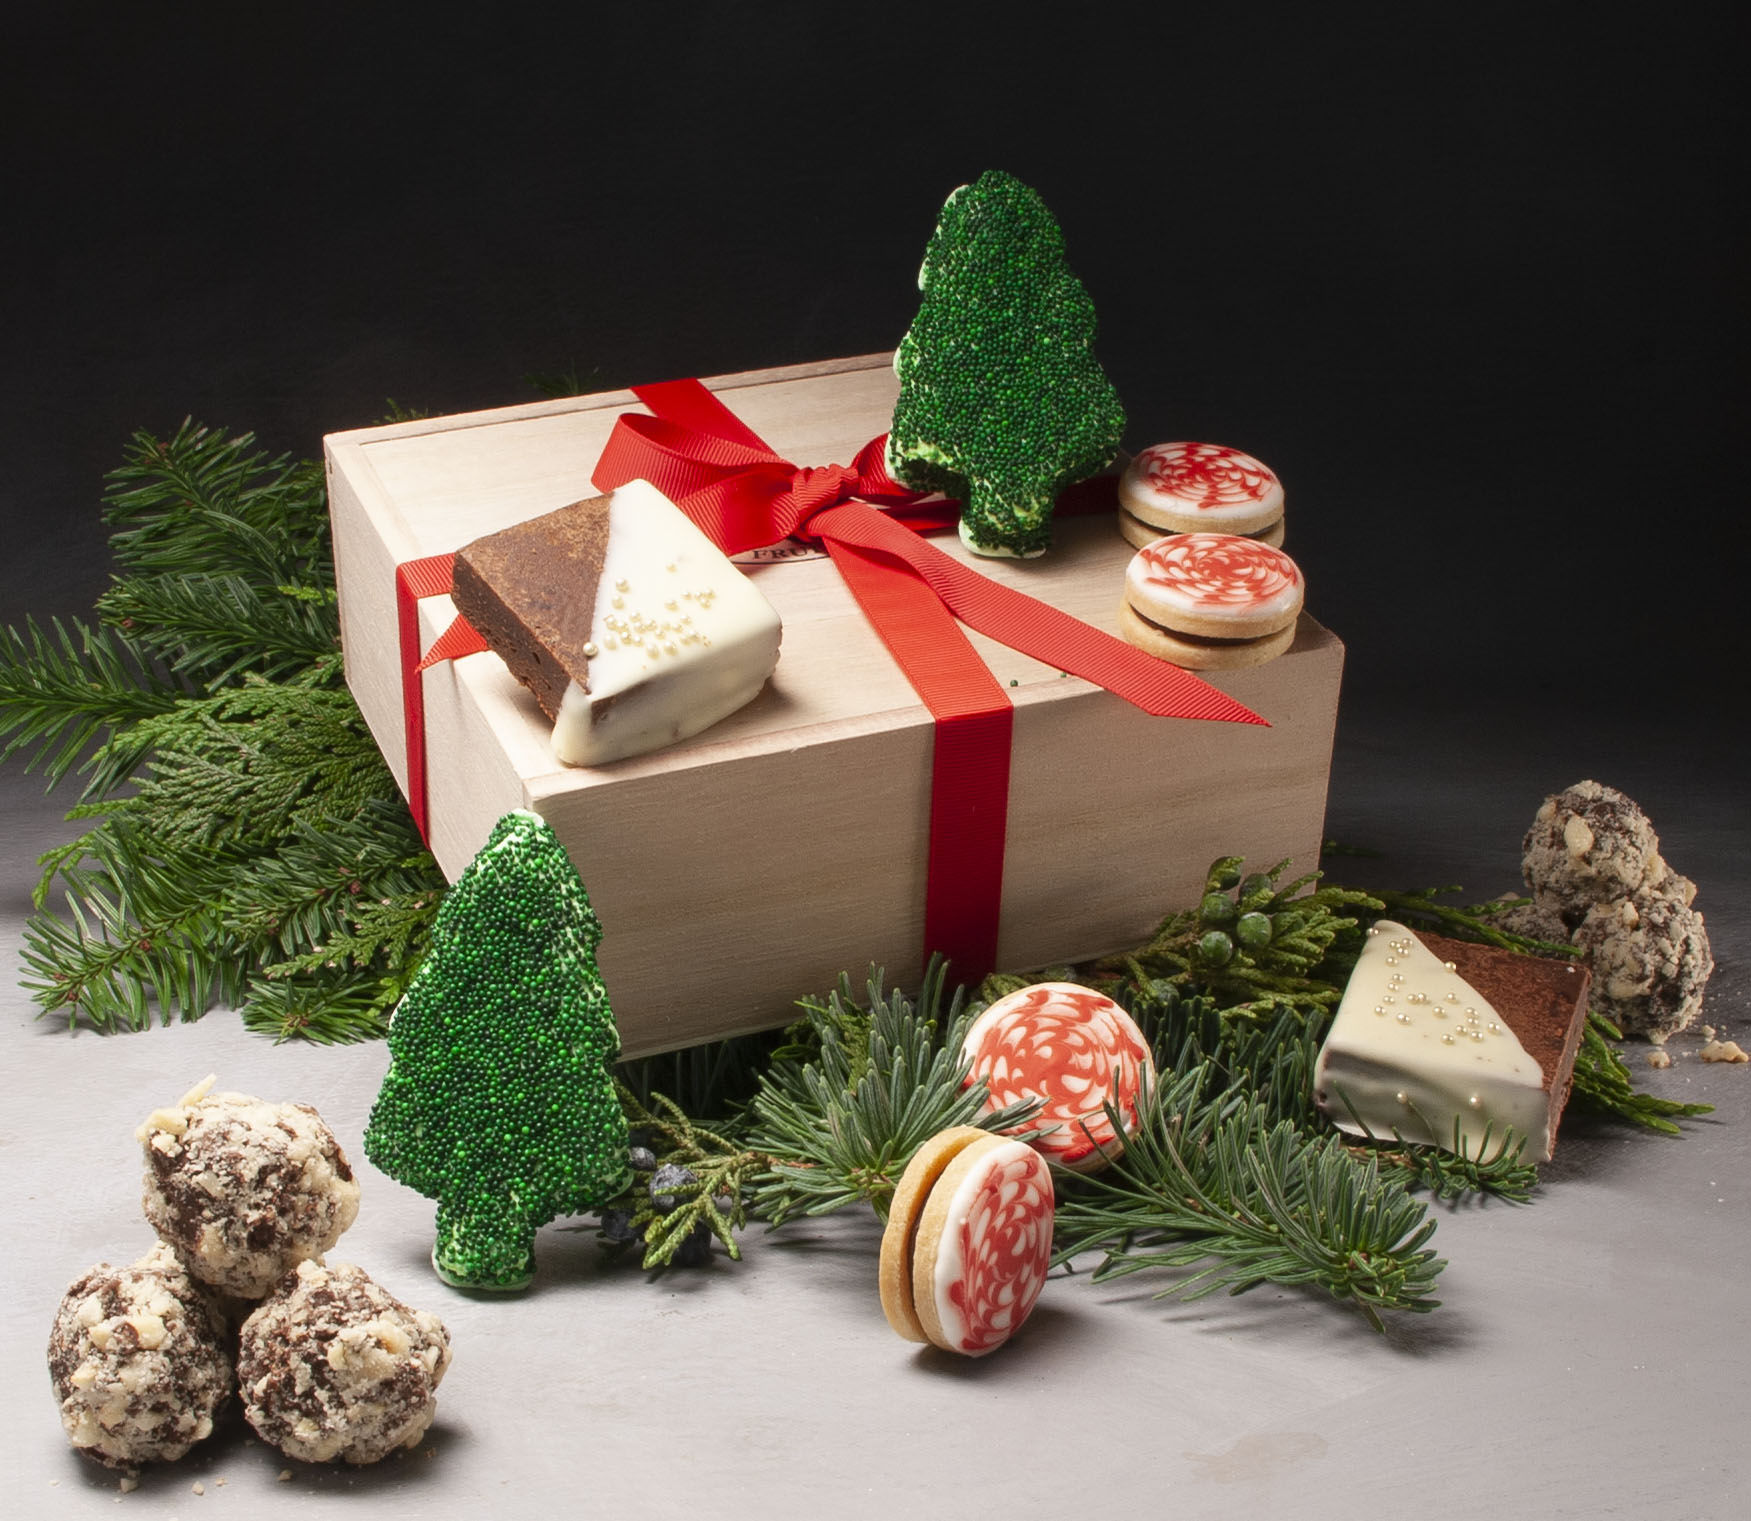 Have Yourself a Merry Little Christmas Box